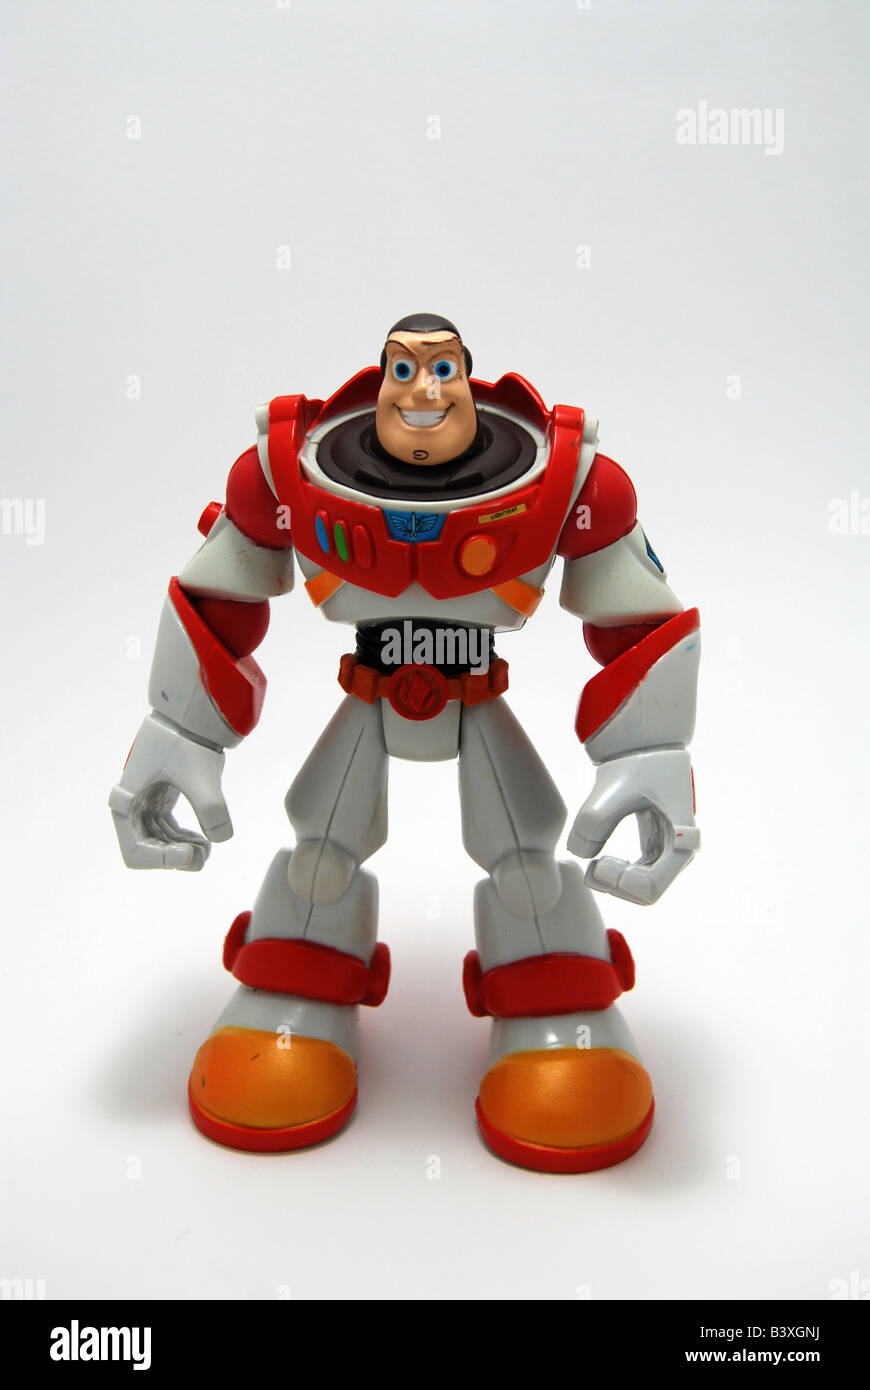 Buzz Lightyear from Toy Story film action figure Stock Photo - Alamy